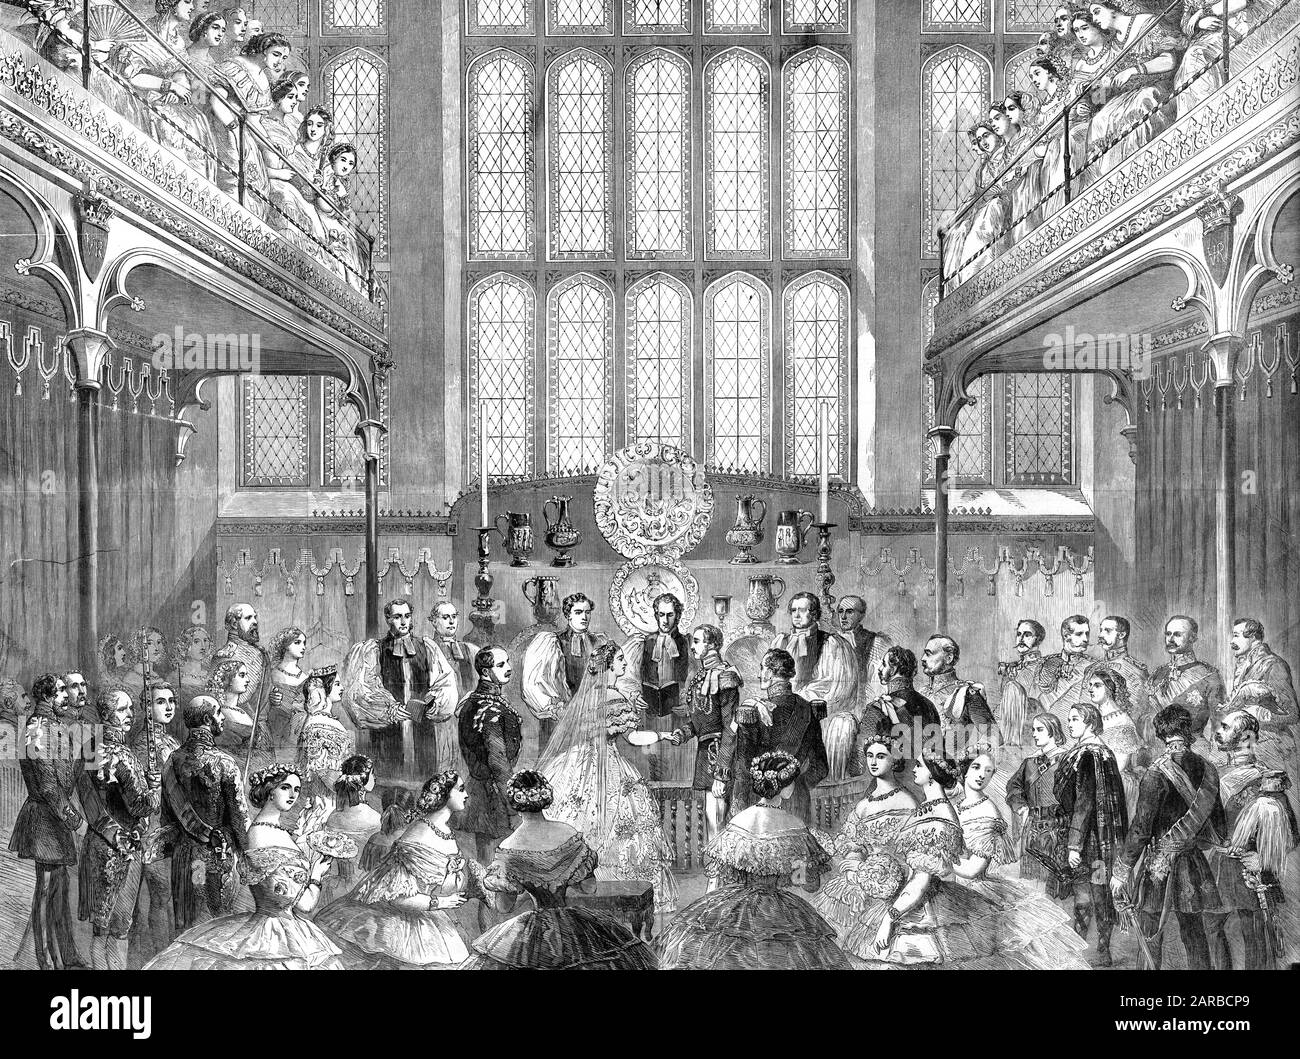 The marriage of Crown Prince Frederick William of Prussia (1831 - 1888) and the Princess Royal (1840 - 1901), eldest daughter of Queen Victoria, in the Chapel Royal at St James's Palace. The couple hold hands whilst the congregation look on.     Date: 25th January 1858 Stock Photo